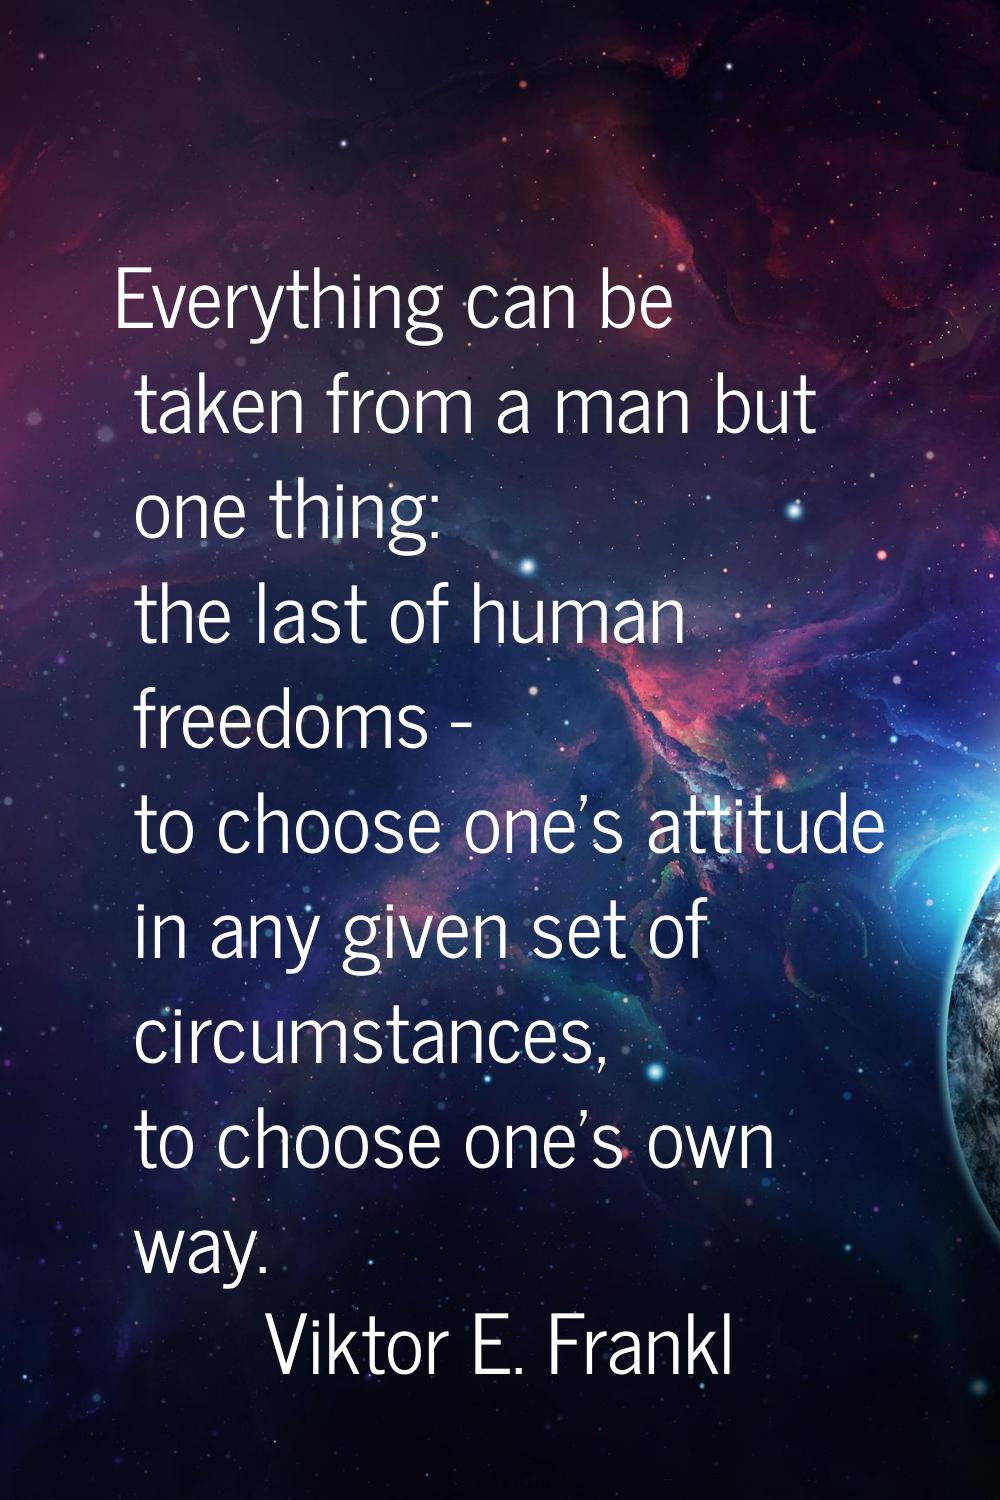 Everything can be taken from a man but one thing: the last of human freedoms - to choose one's atti